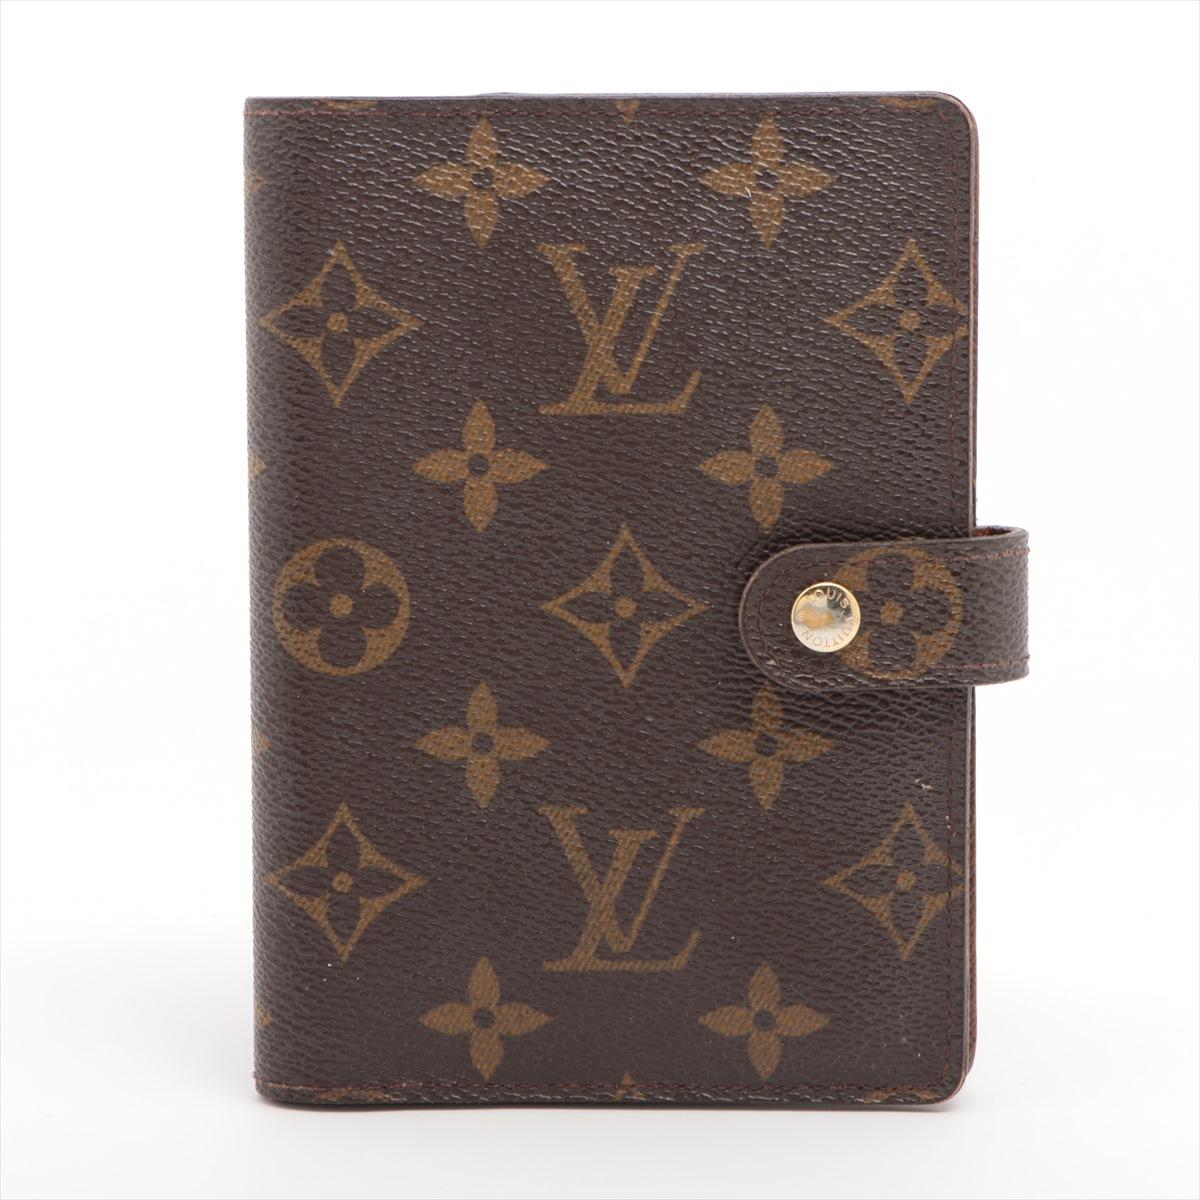 The Louis Vuitton Monogram Agenda PM is a stylish and versatile accessory. The Agenda PM is a compact and practical organizer that combines timeless style with functionality. The agenda showcases Louis Vuitton's signature pattern, making it